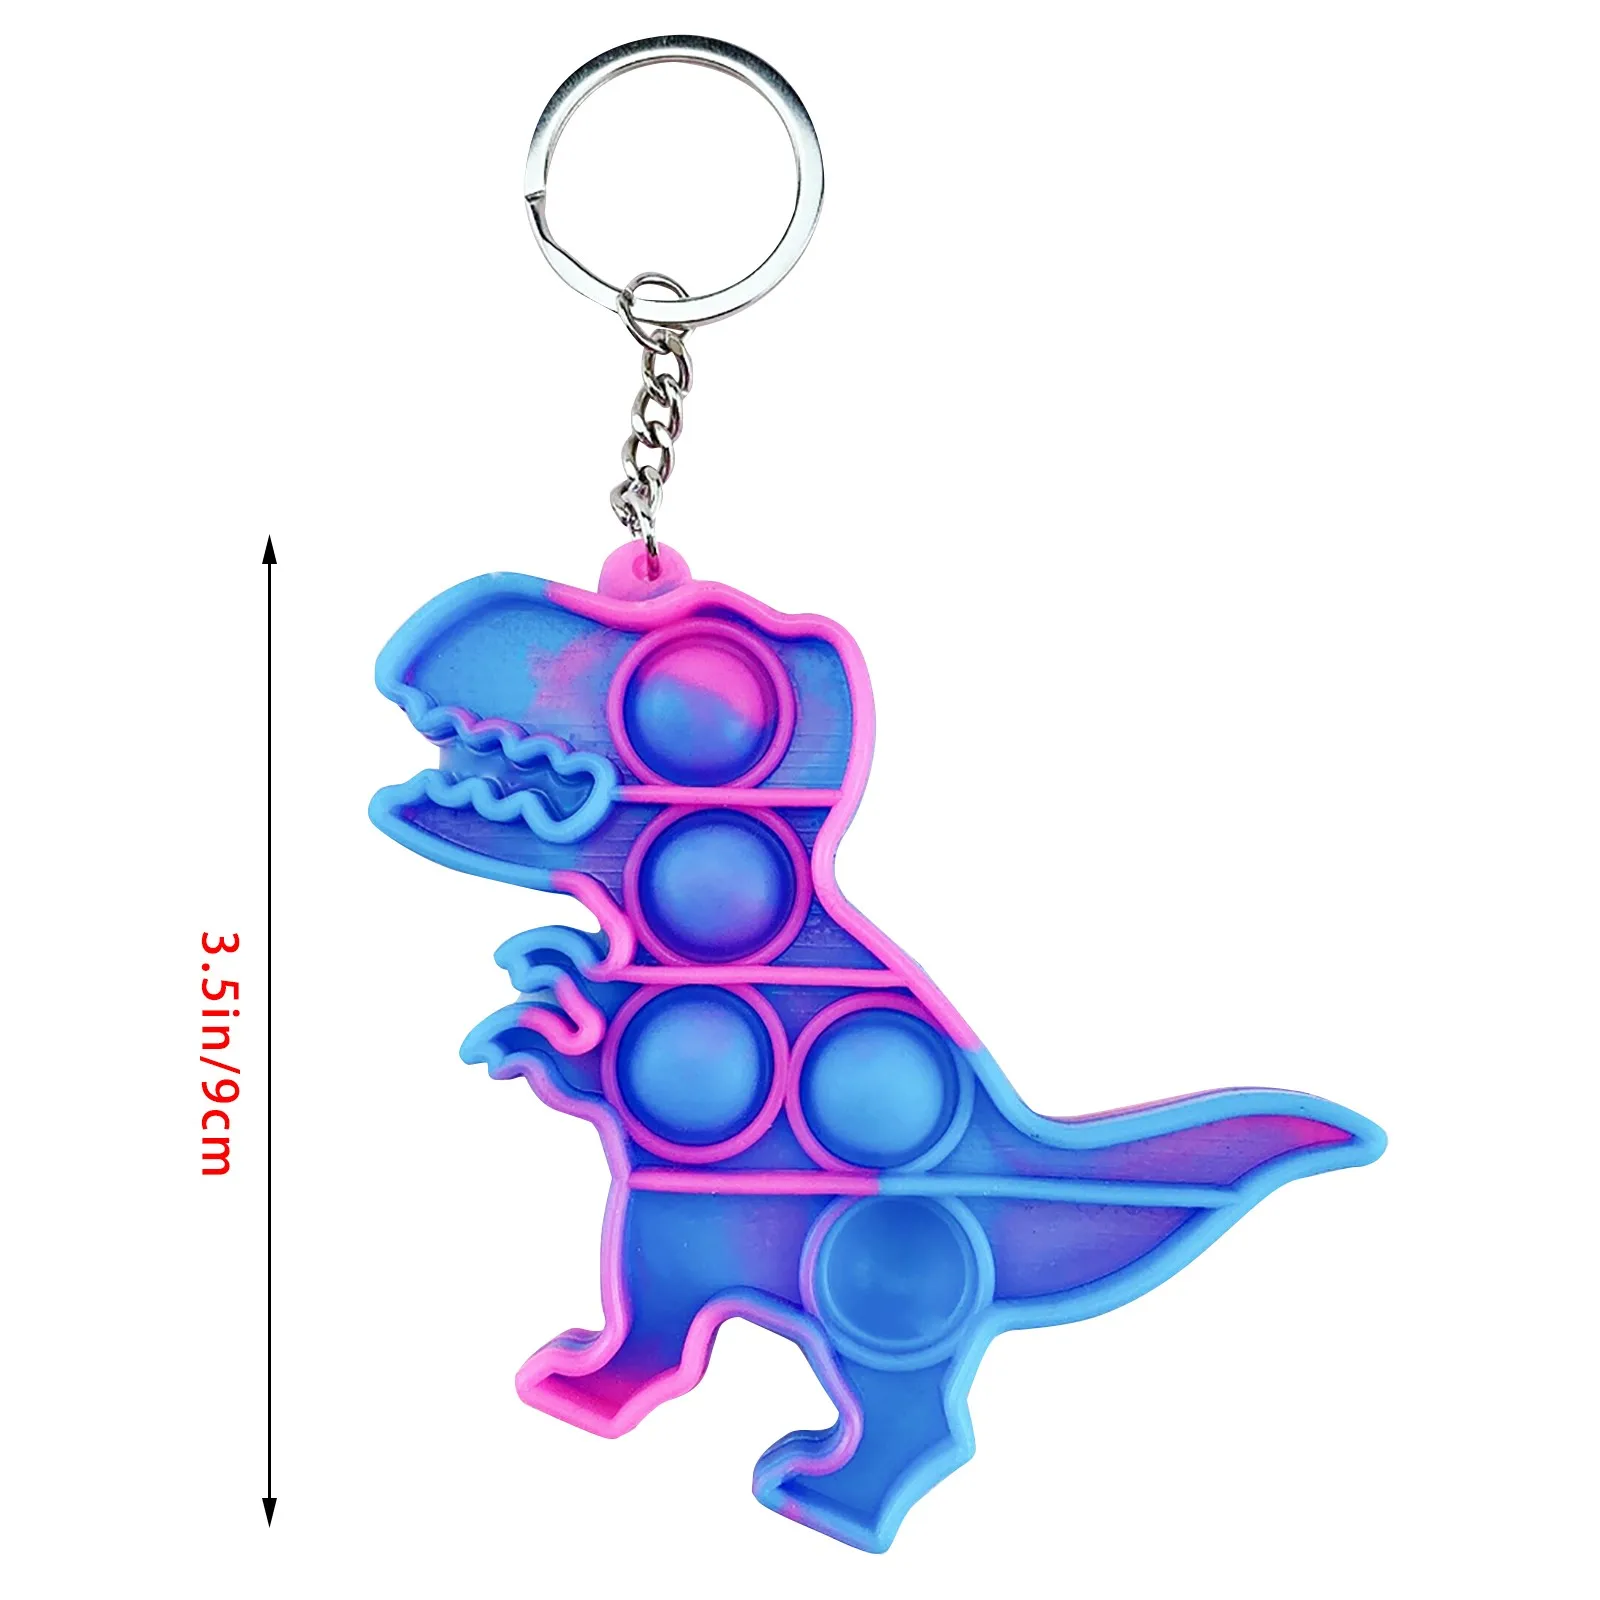 New push pops its mini keychain dinosaur simple dimple fidget toy for autism adhd anxiety anti stress relief edc sensory bubble atomic nee dohs